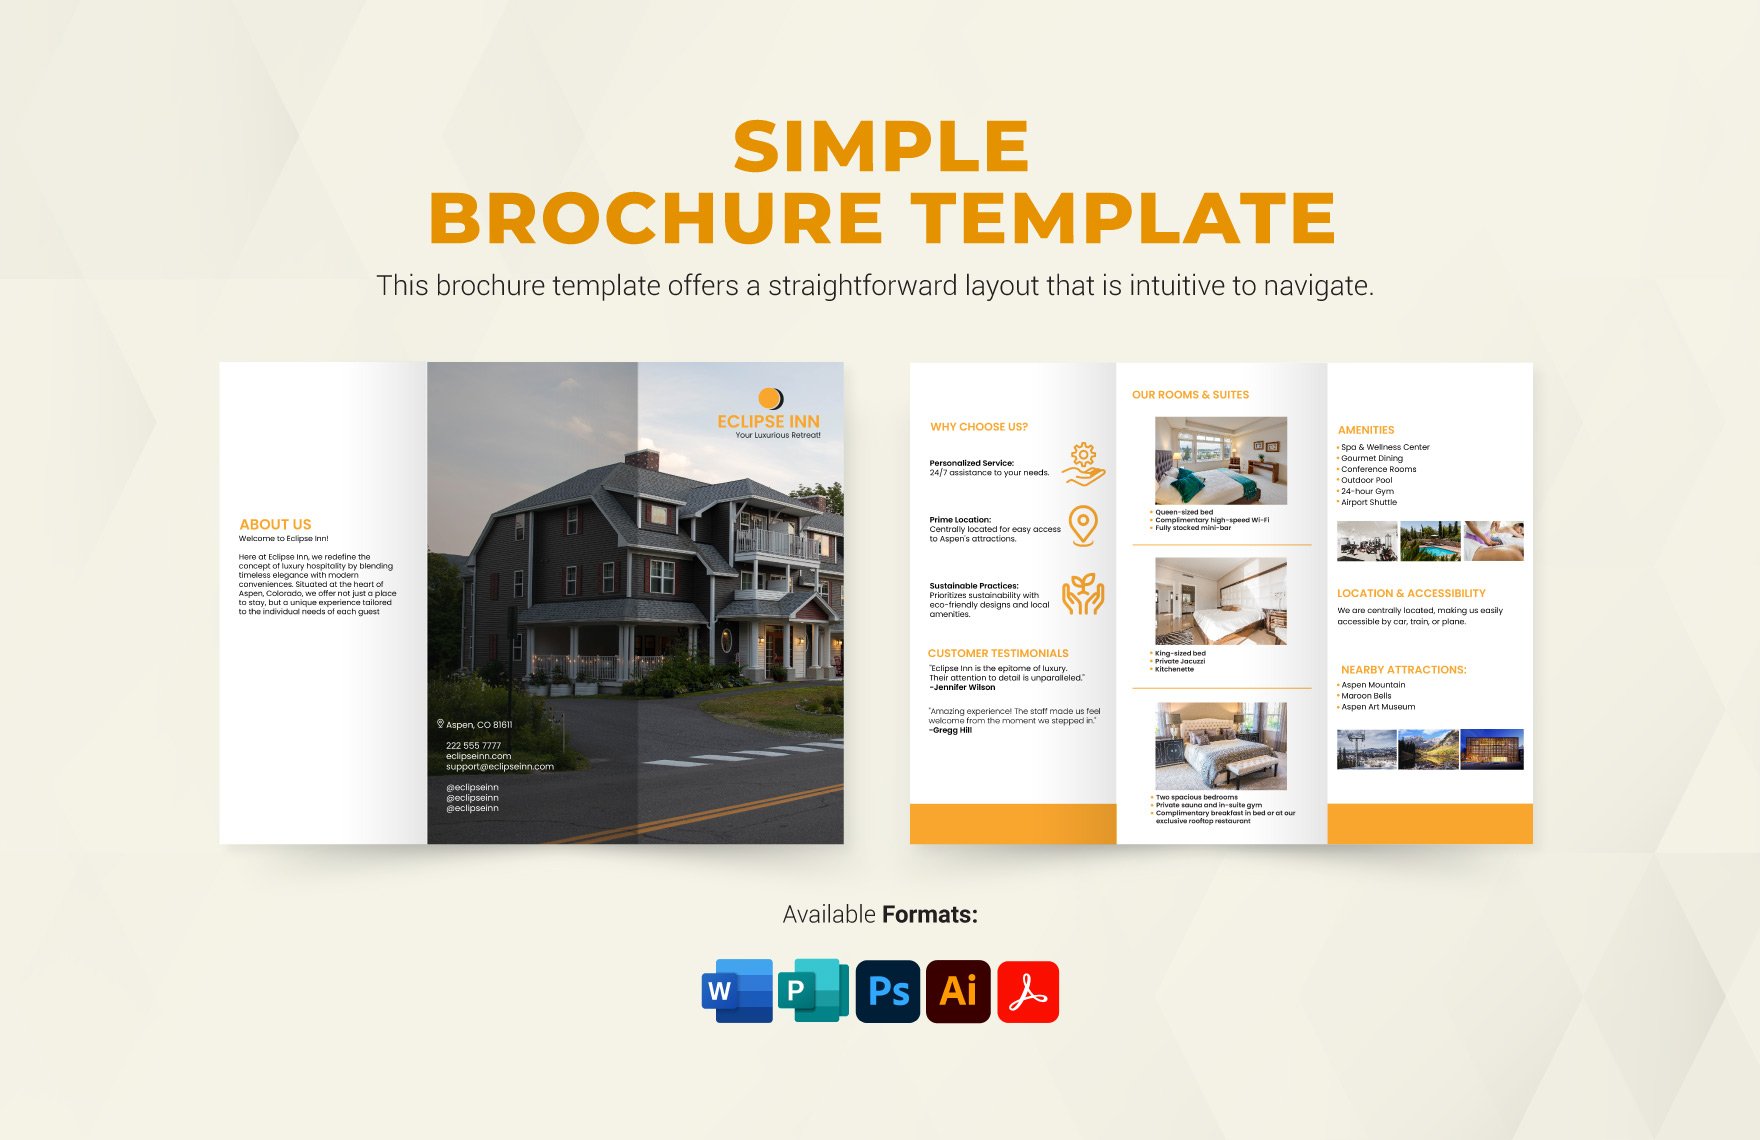 Simple Brochure Template in Word, PDF, Illustrator, PSD, Publisher